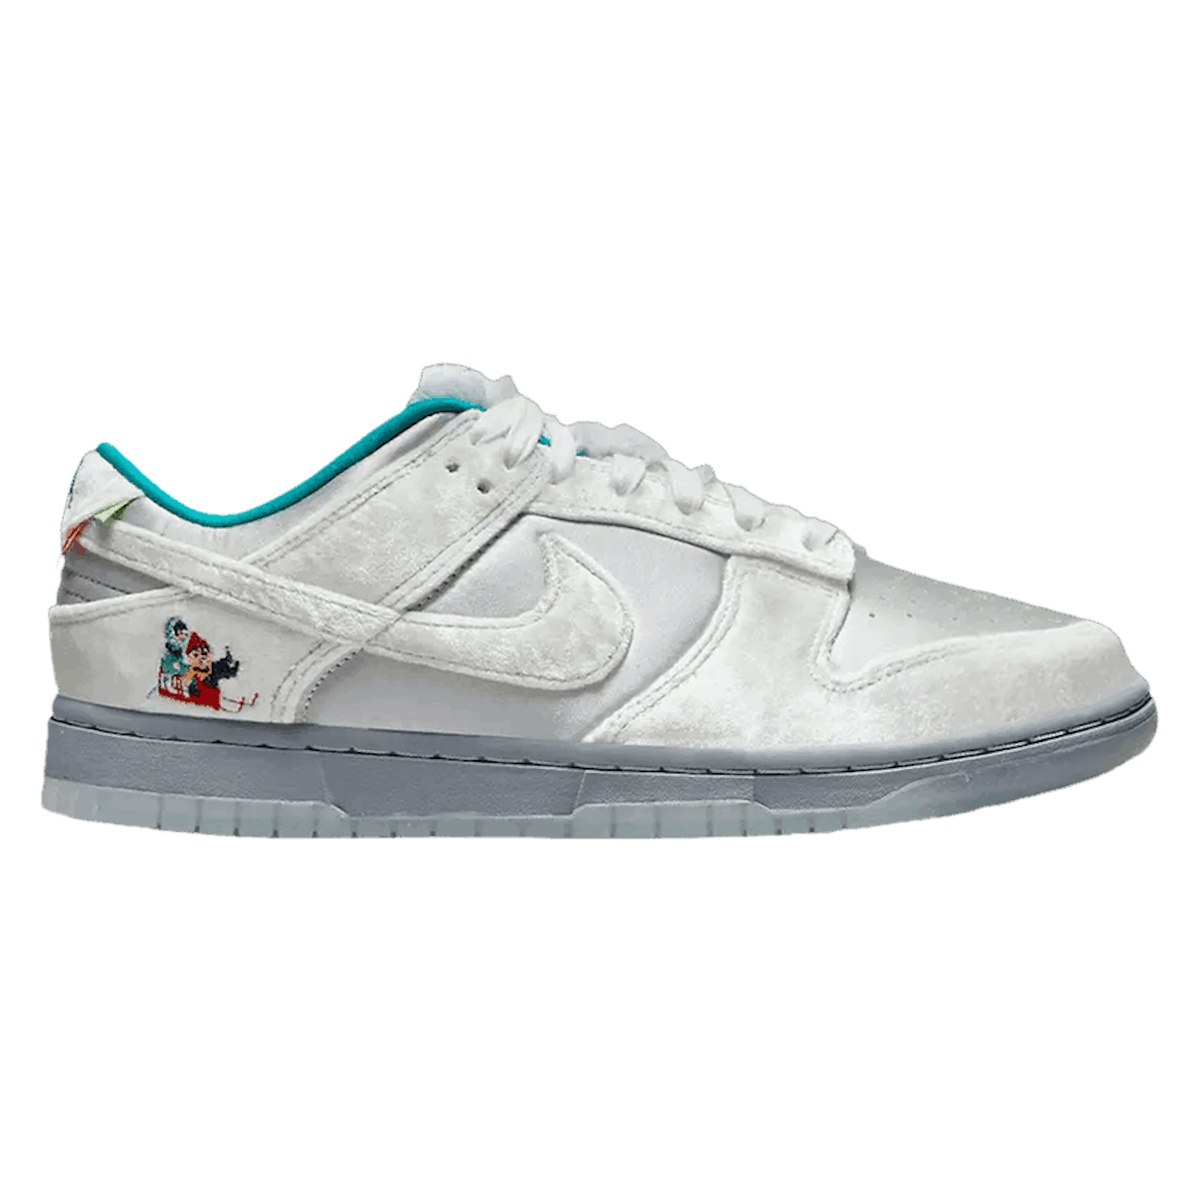 Nike Dunk Low WMNS "Ice"